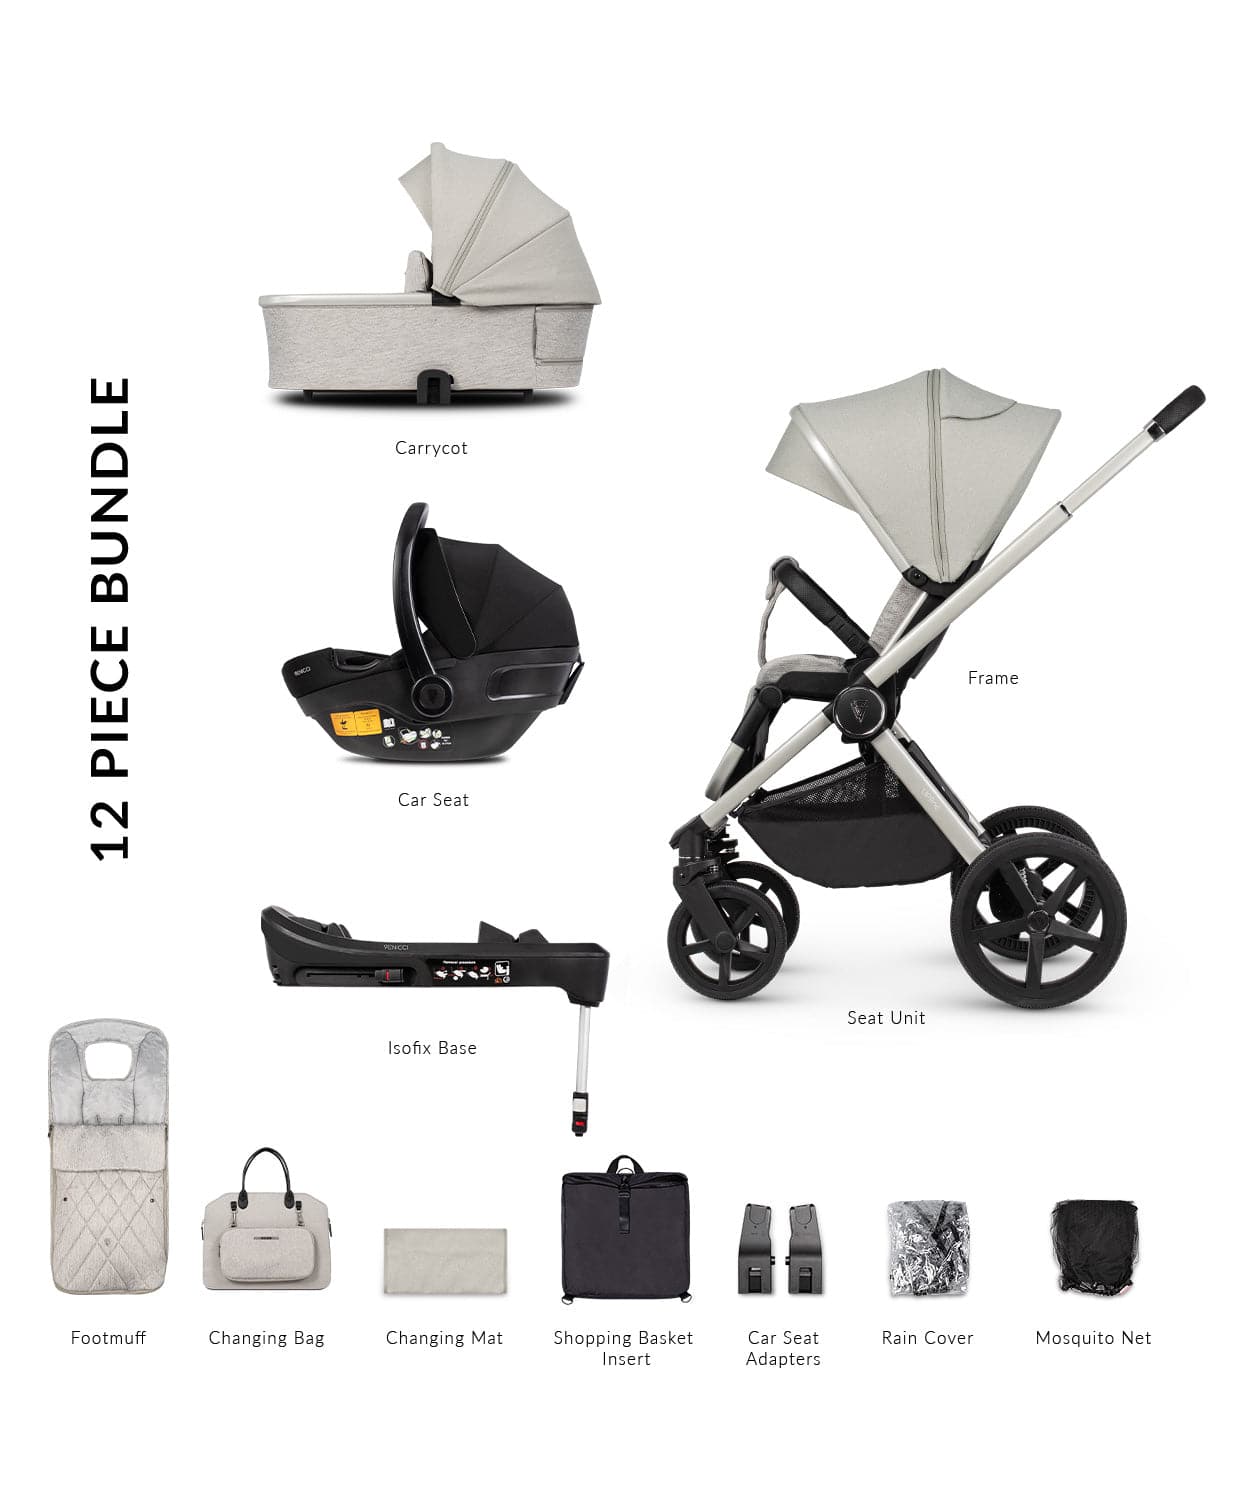 Venicci Tinum Upline 3 in 1 Travel System Bundle + IQ Base - Moonstone -  | For Your Little One